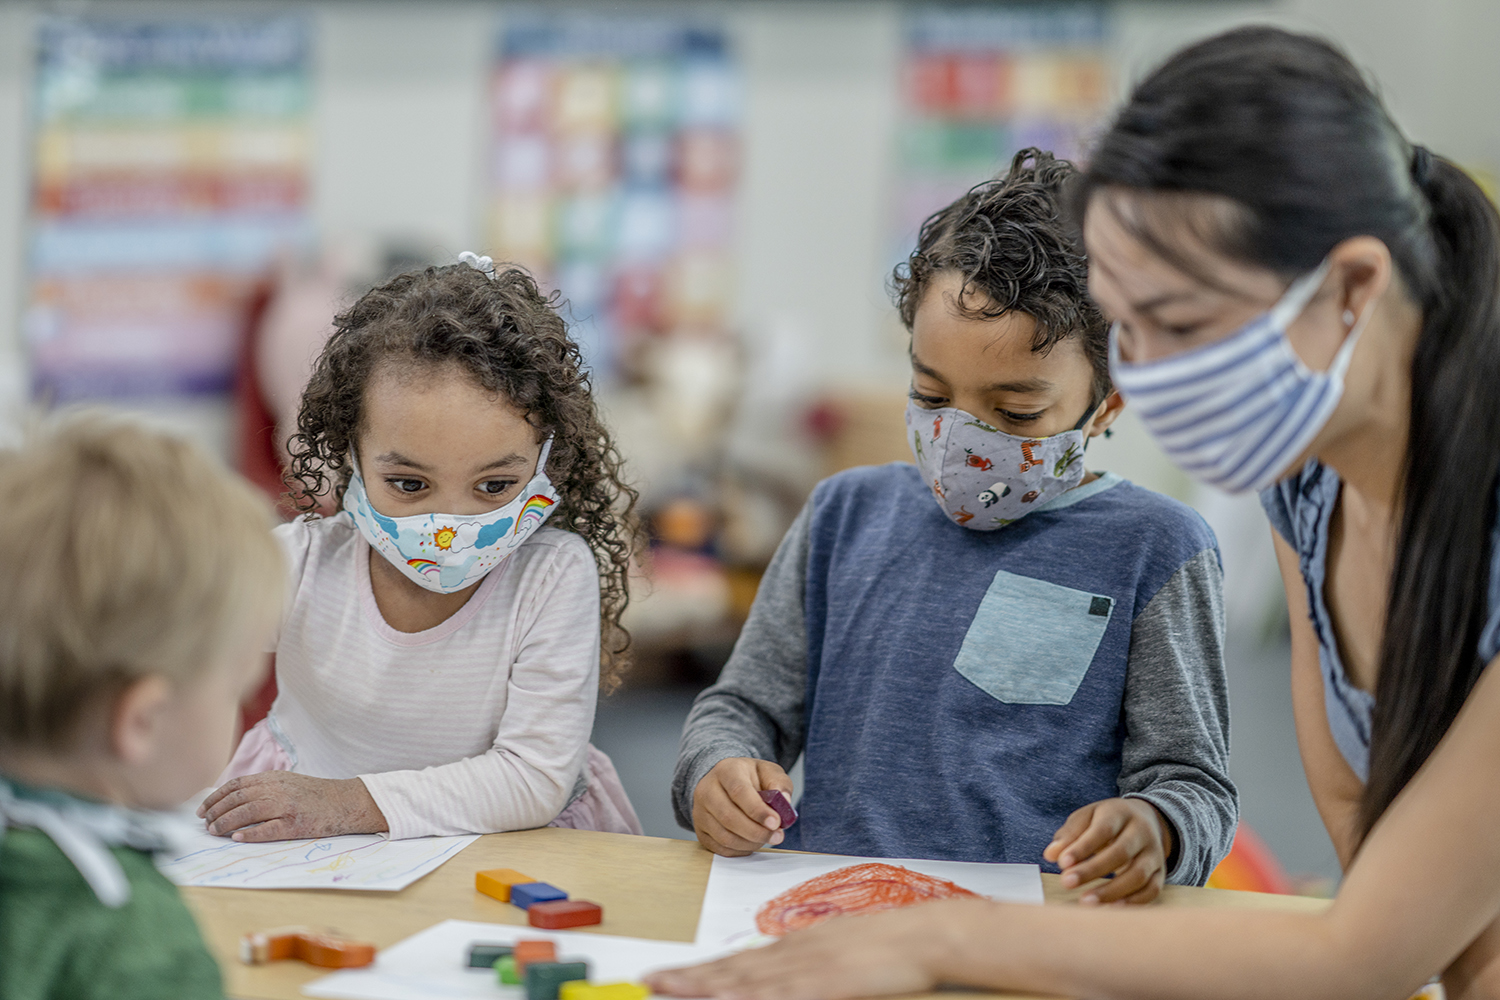 Multi-ethnic group of children coloring at a table while wearing protective face masks to avoid the transfer of germs.